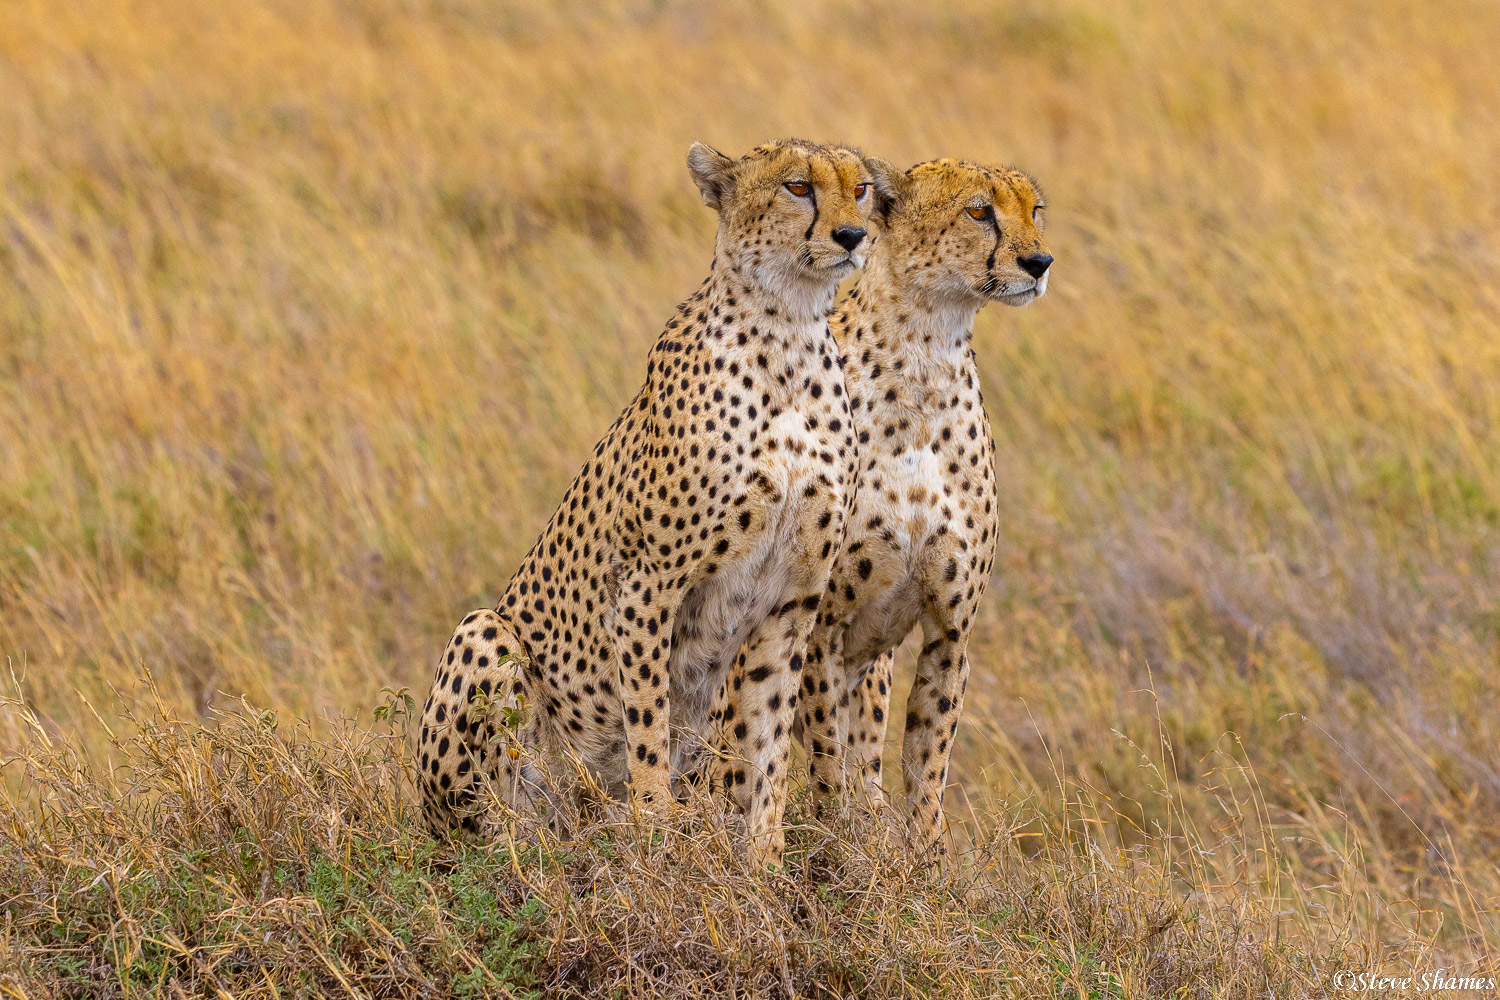 Cheetah brothers, intently looking at something.